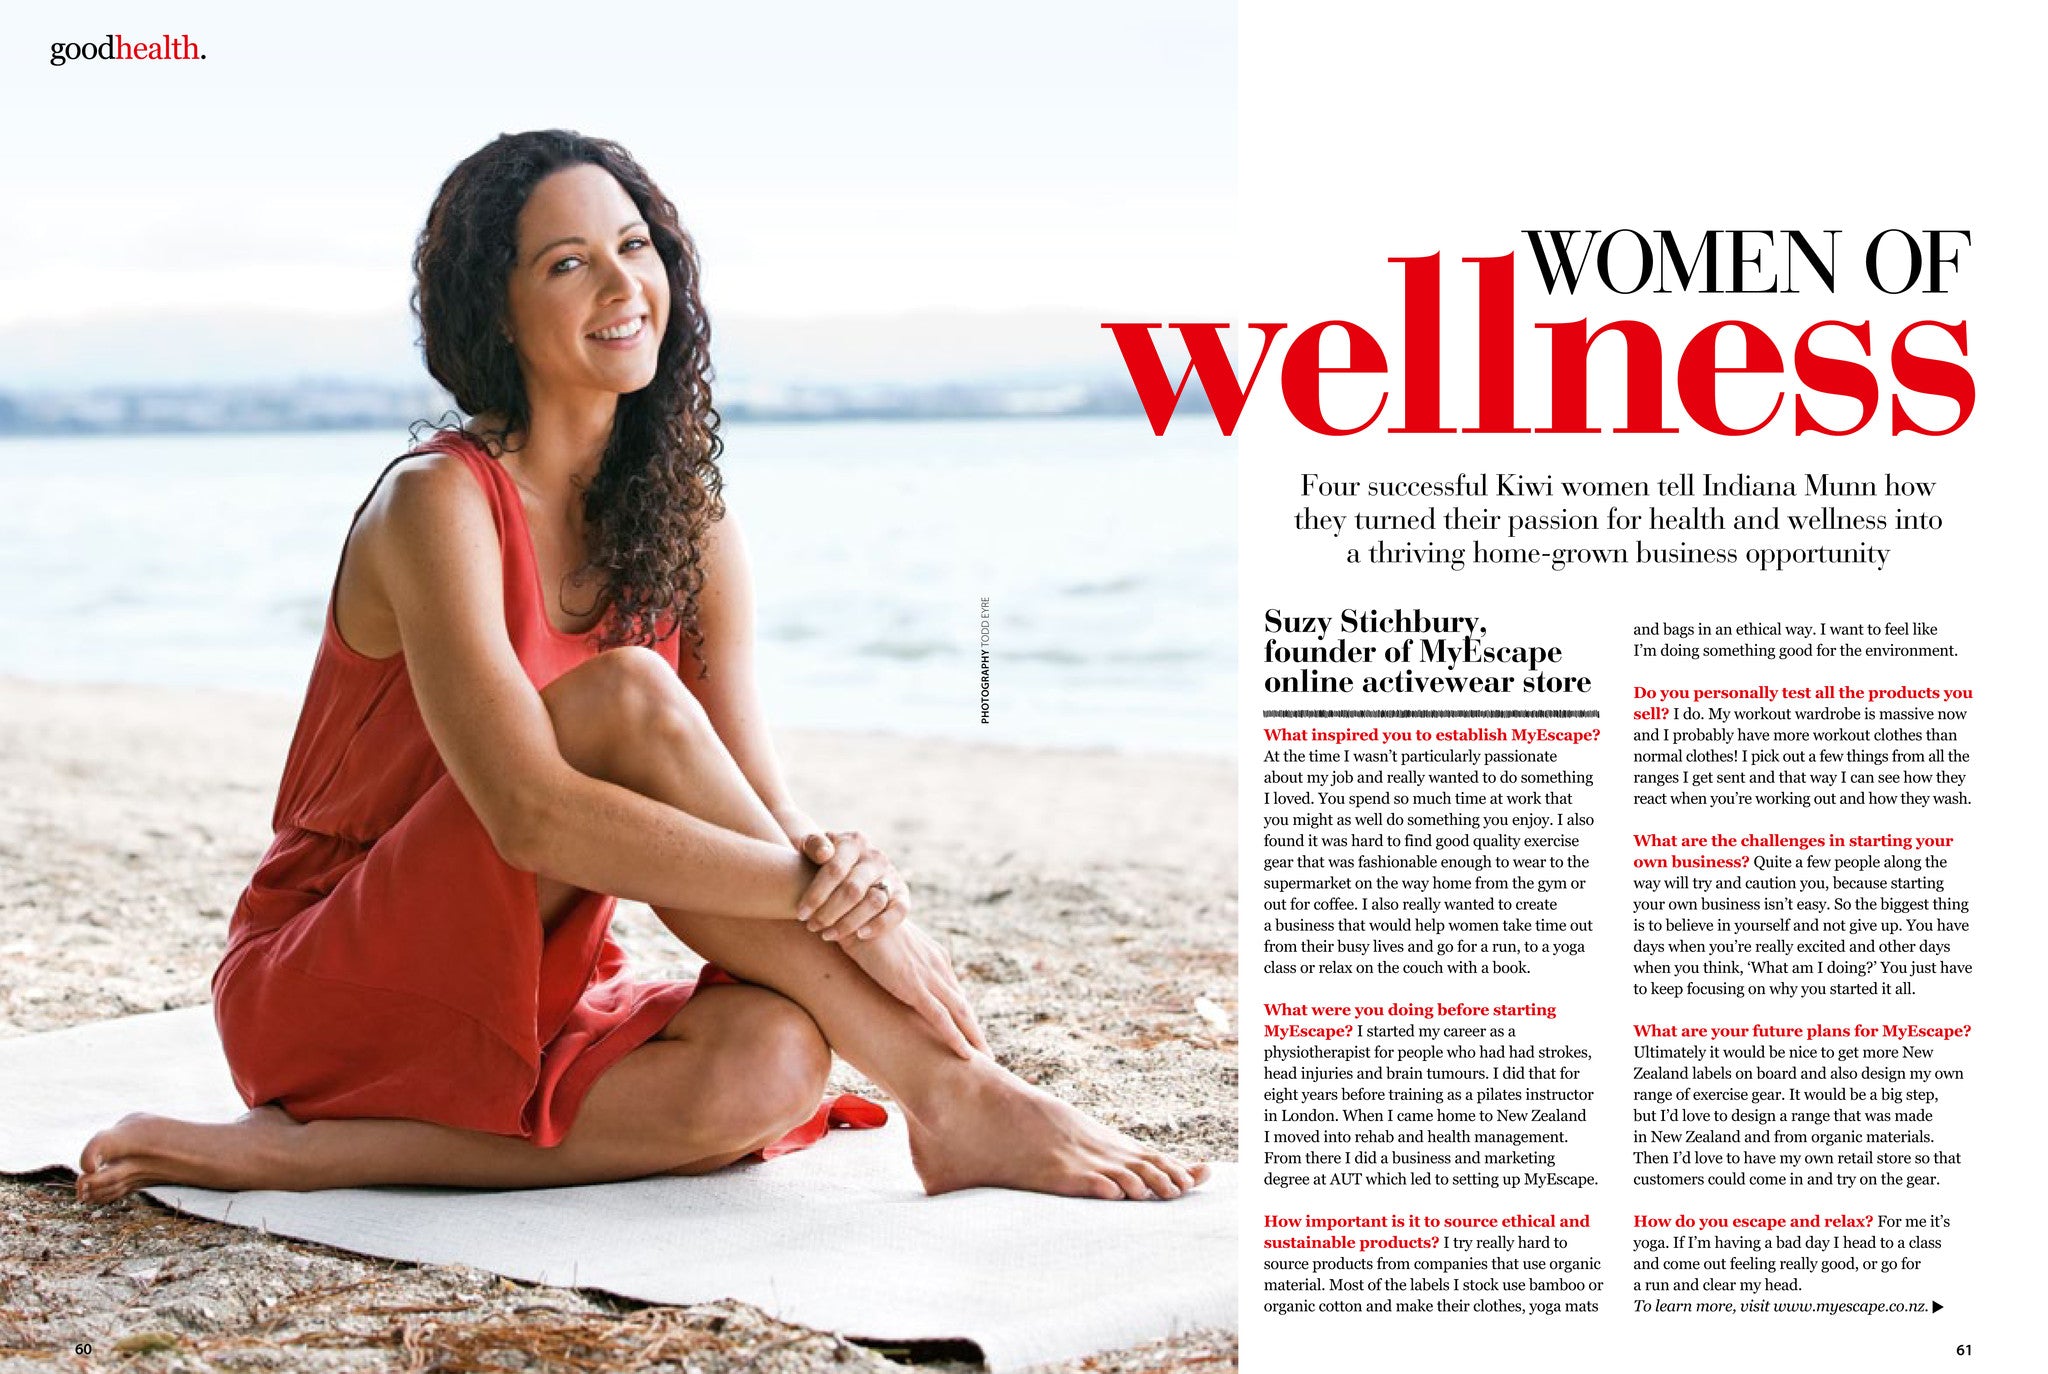 Women of Wellness Article in Good Health - myescape